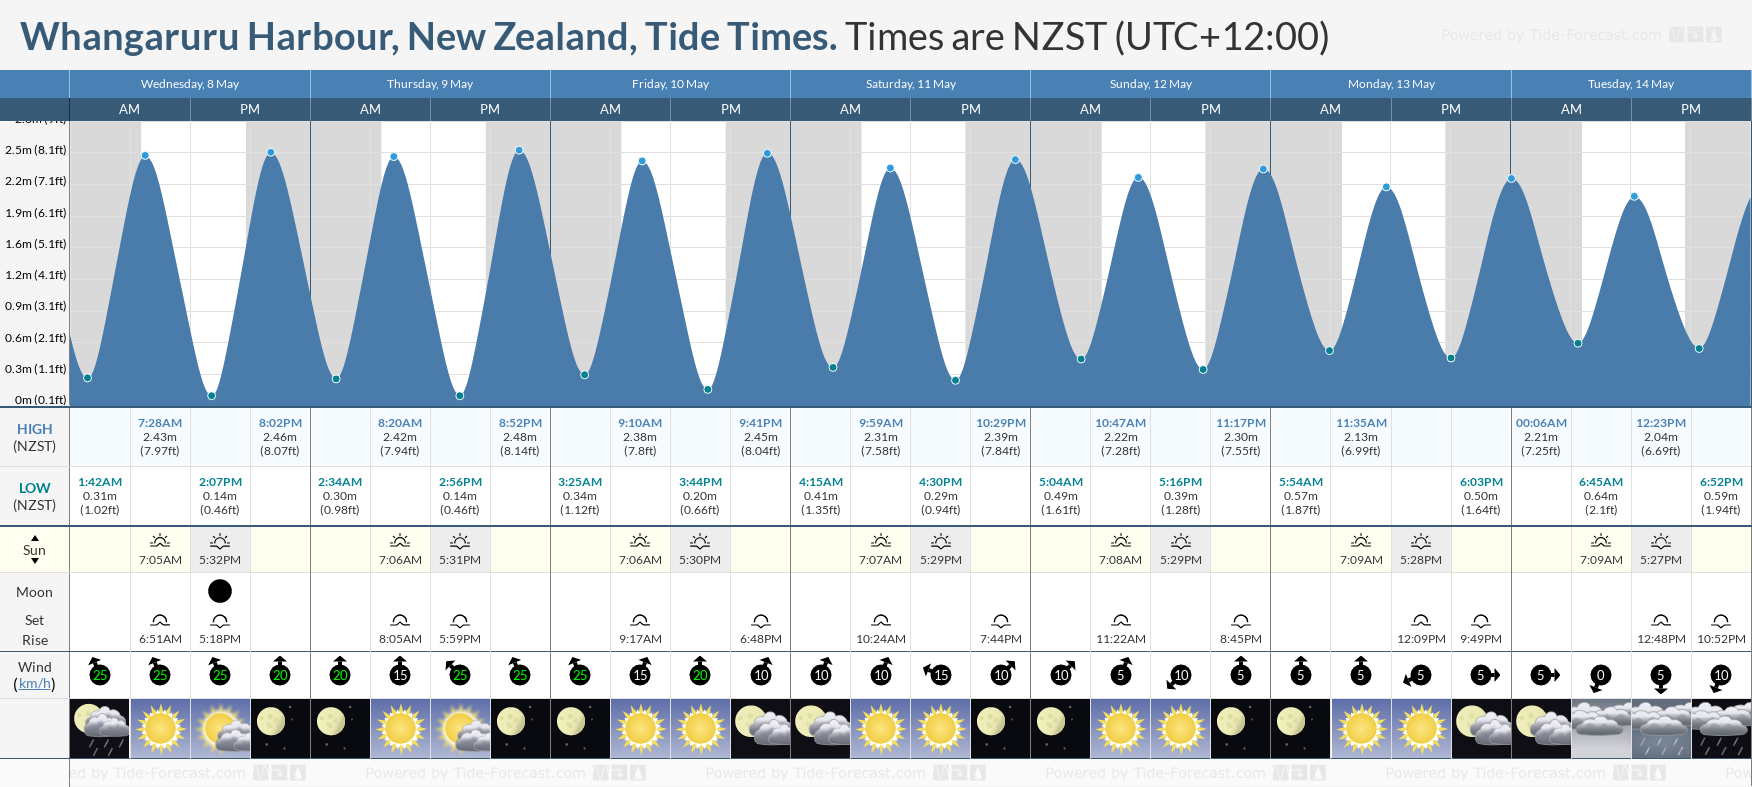 Whangaruru Harbour, New Zealand Tide Chart including high and low tide tide times for the next 7 days